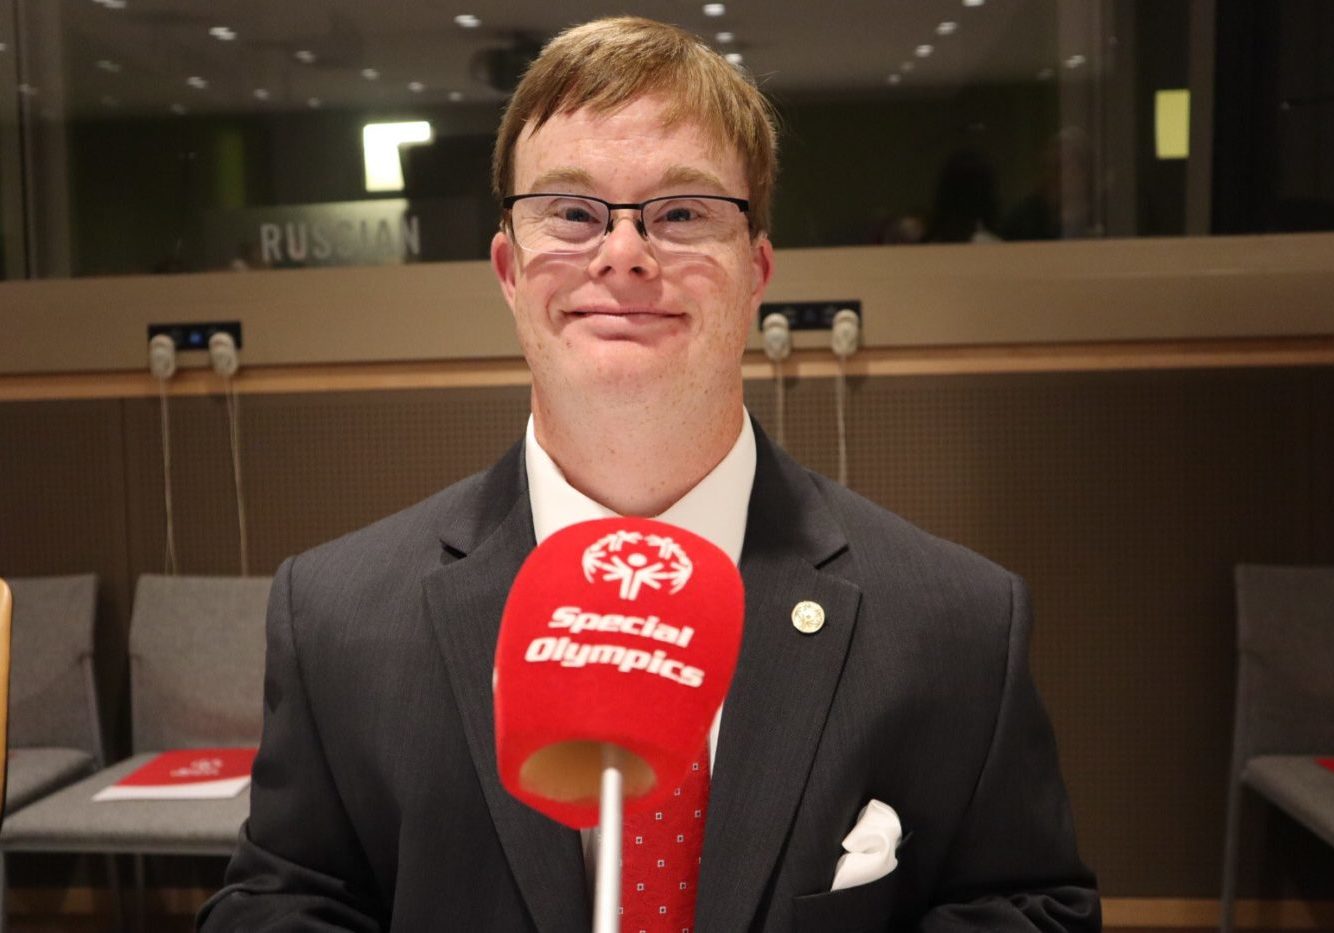 Athlete smiles at camera with a red microphone in front of them